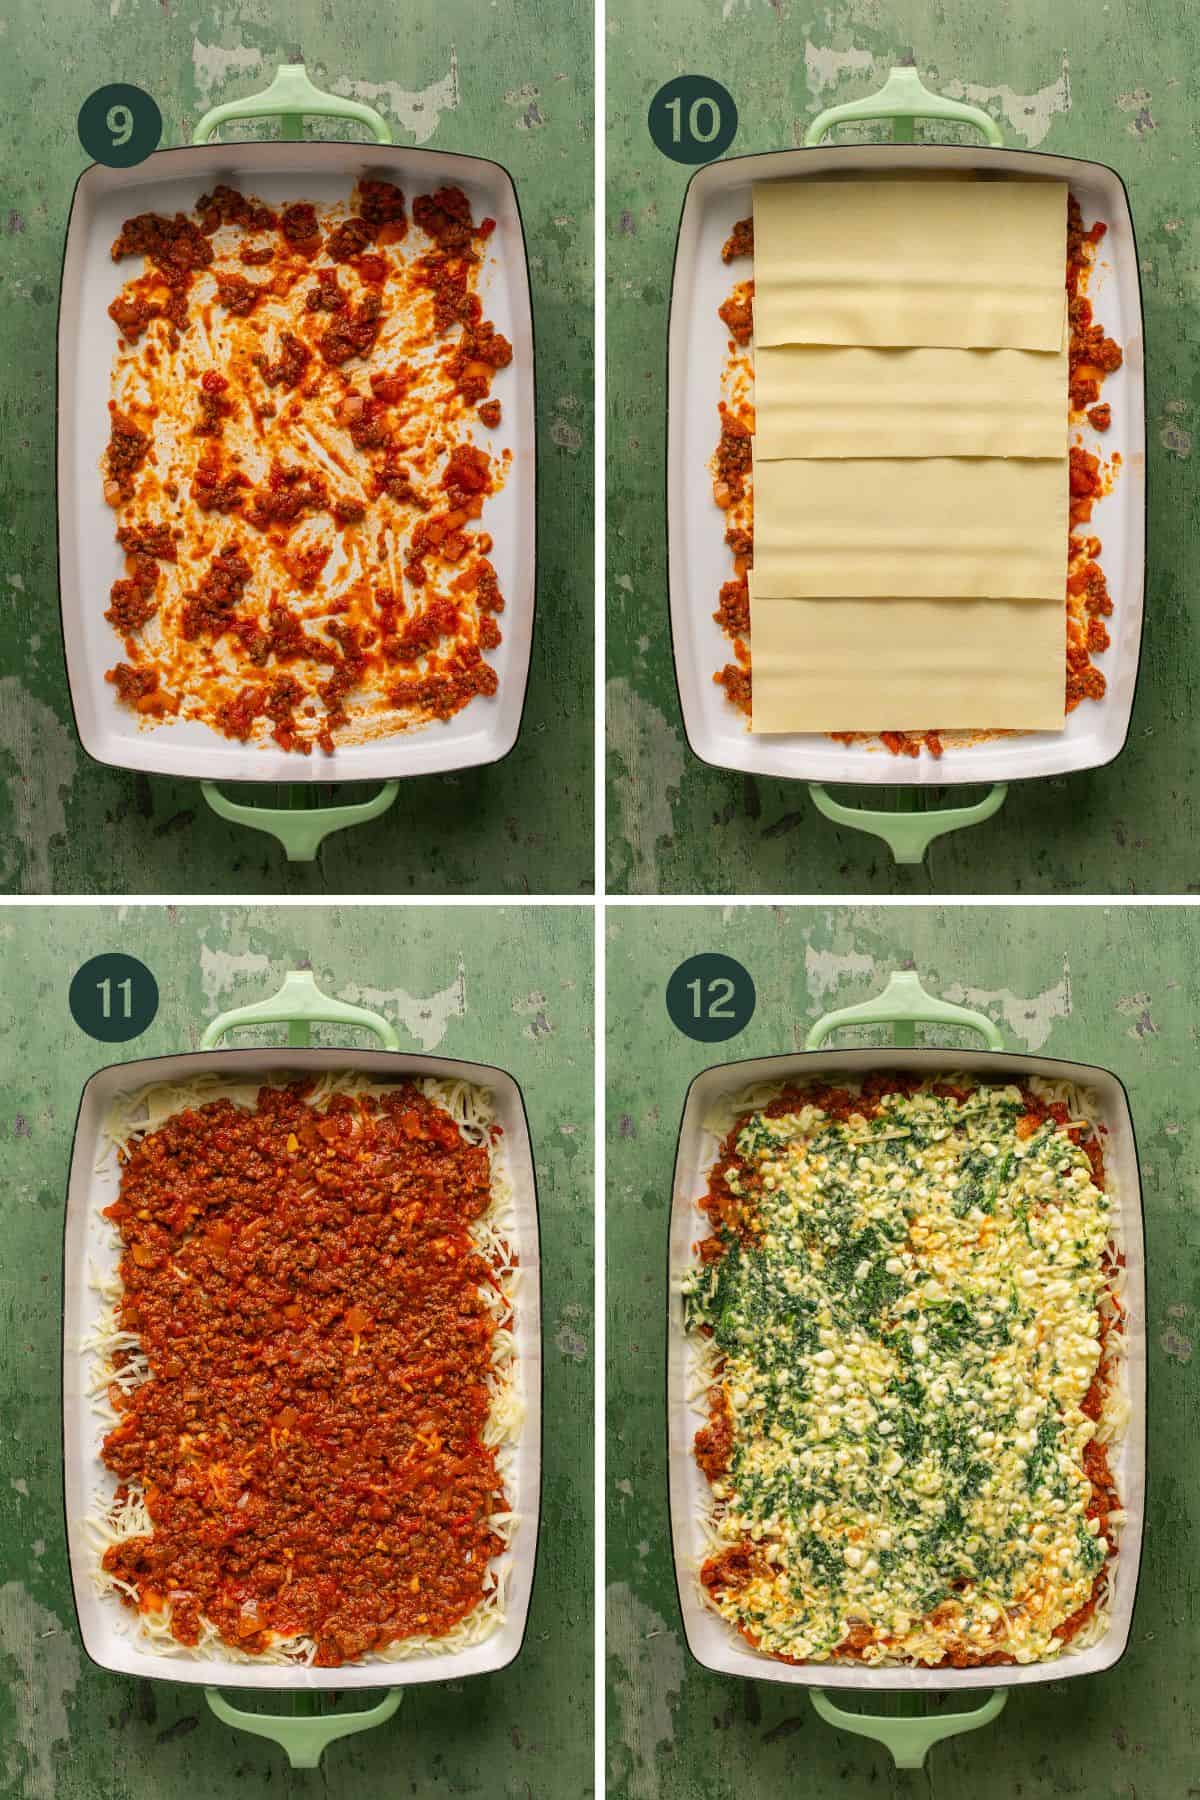 Steps showing layering the lasagna with sauce, noodles, meat sauce, cottage cheese filling in a baking dish. 